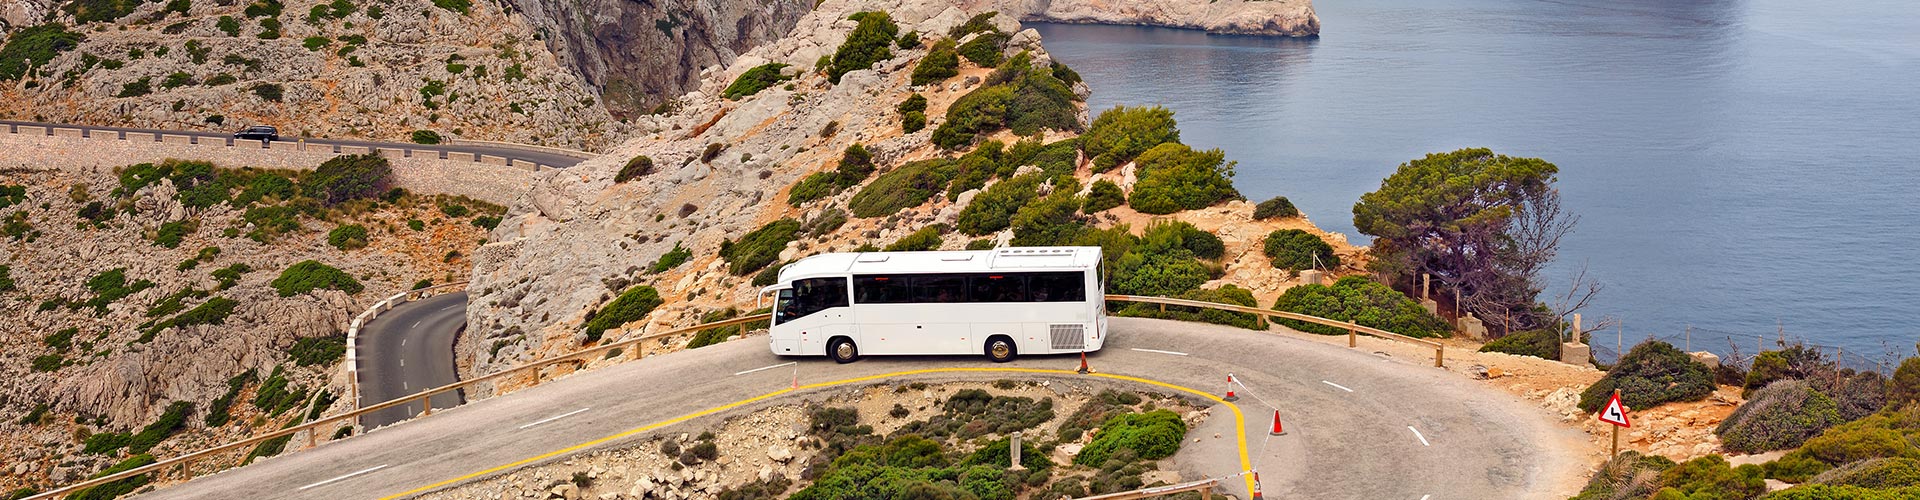 Motorcoach Tours